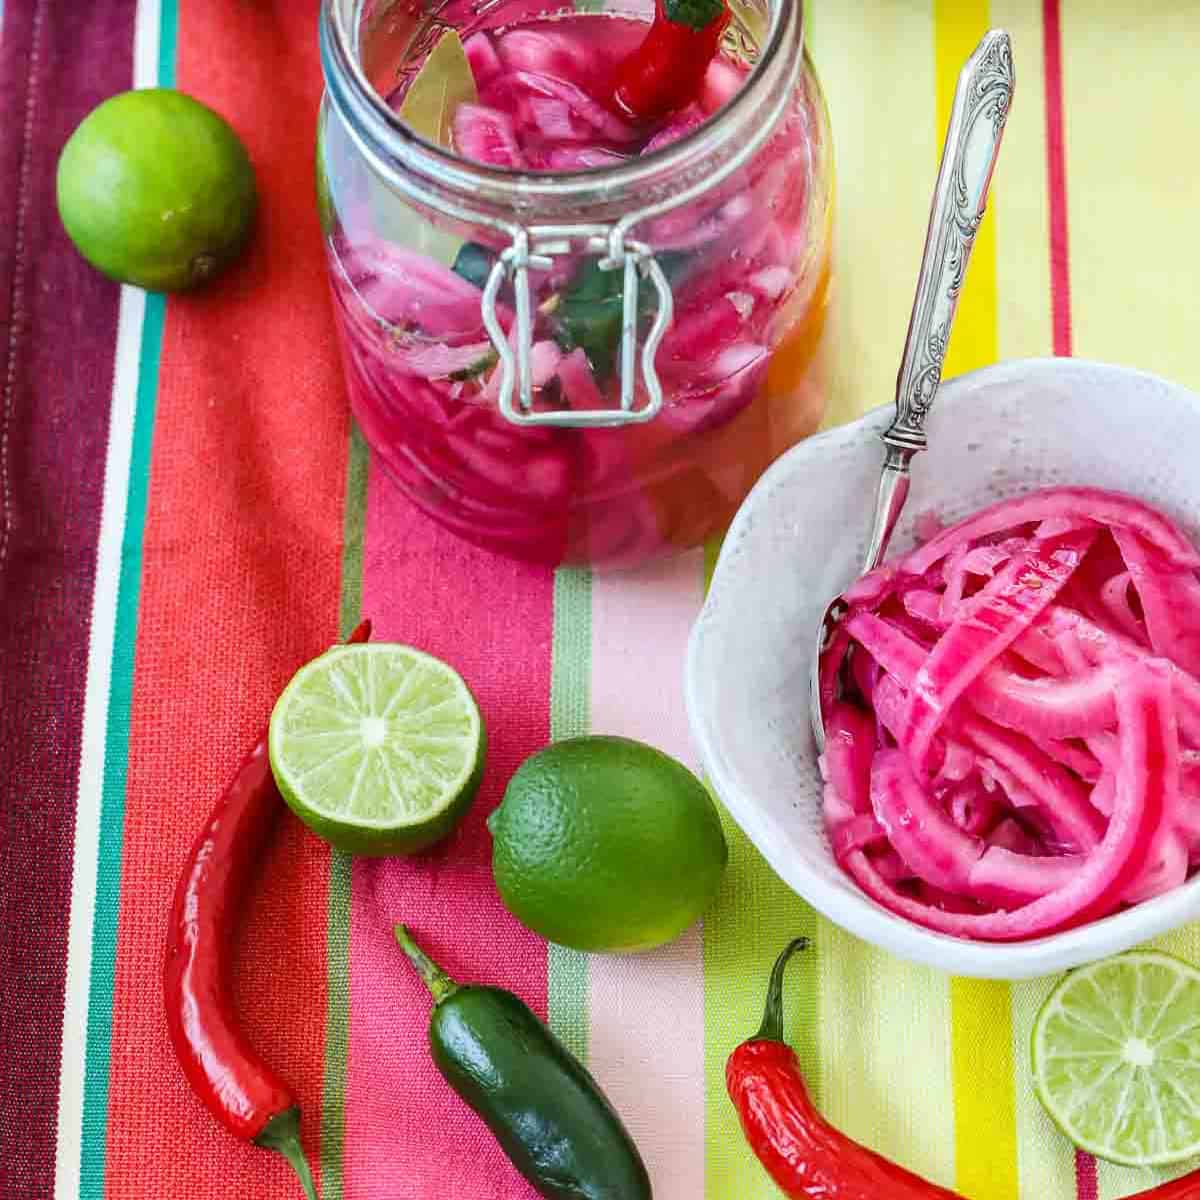 Pickled Red Onions Recipe 